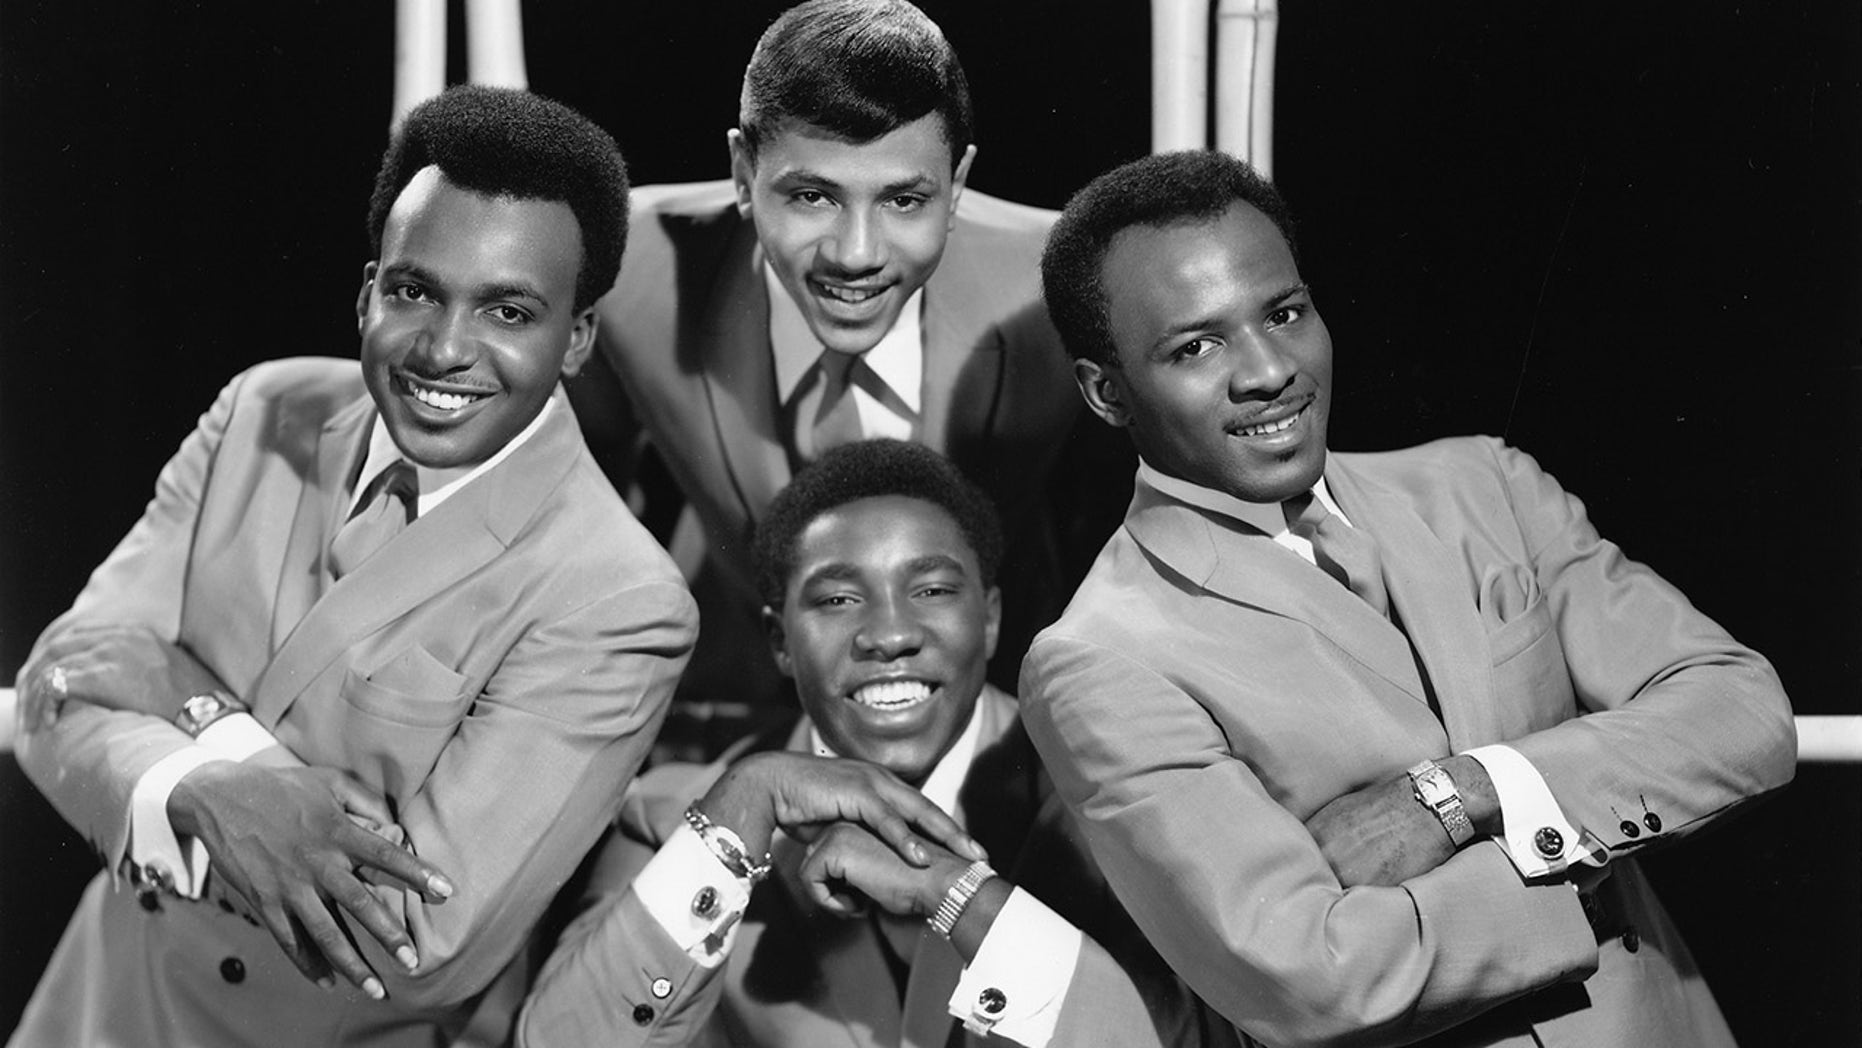 Bill Isles, co-founder of chart-topping The O'Jays, dead at 78 | Fox News